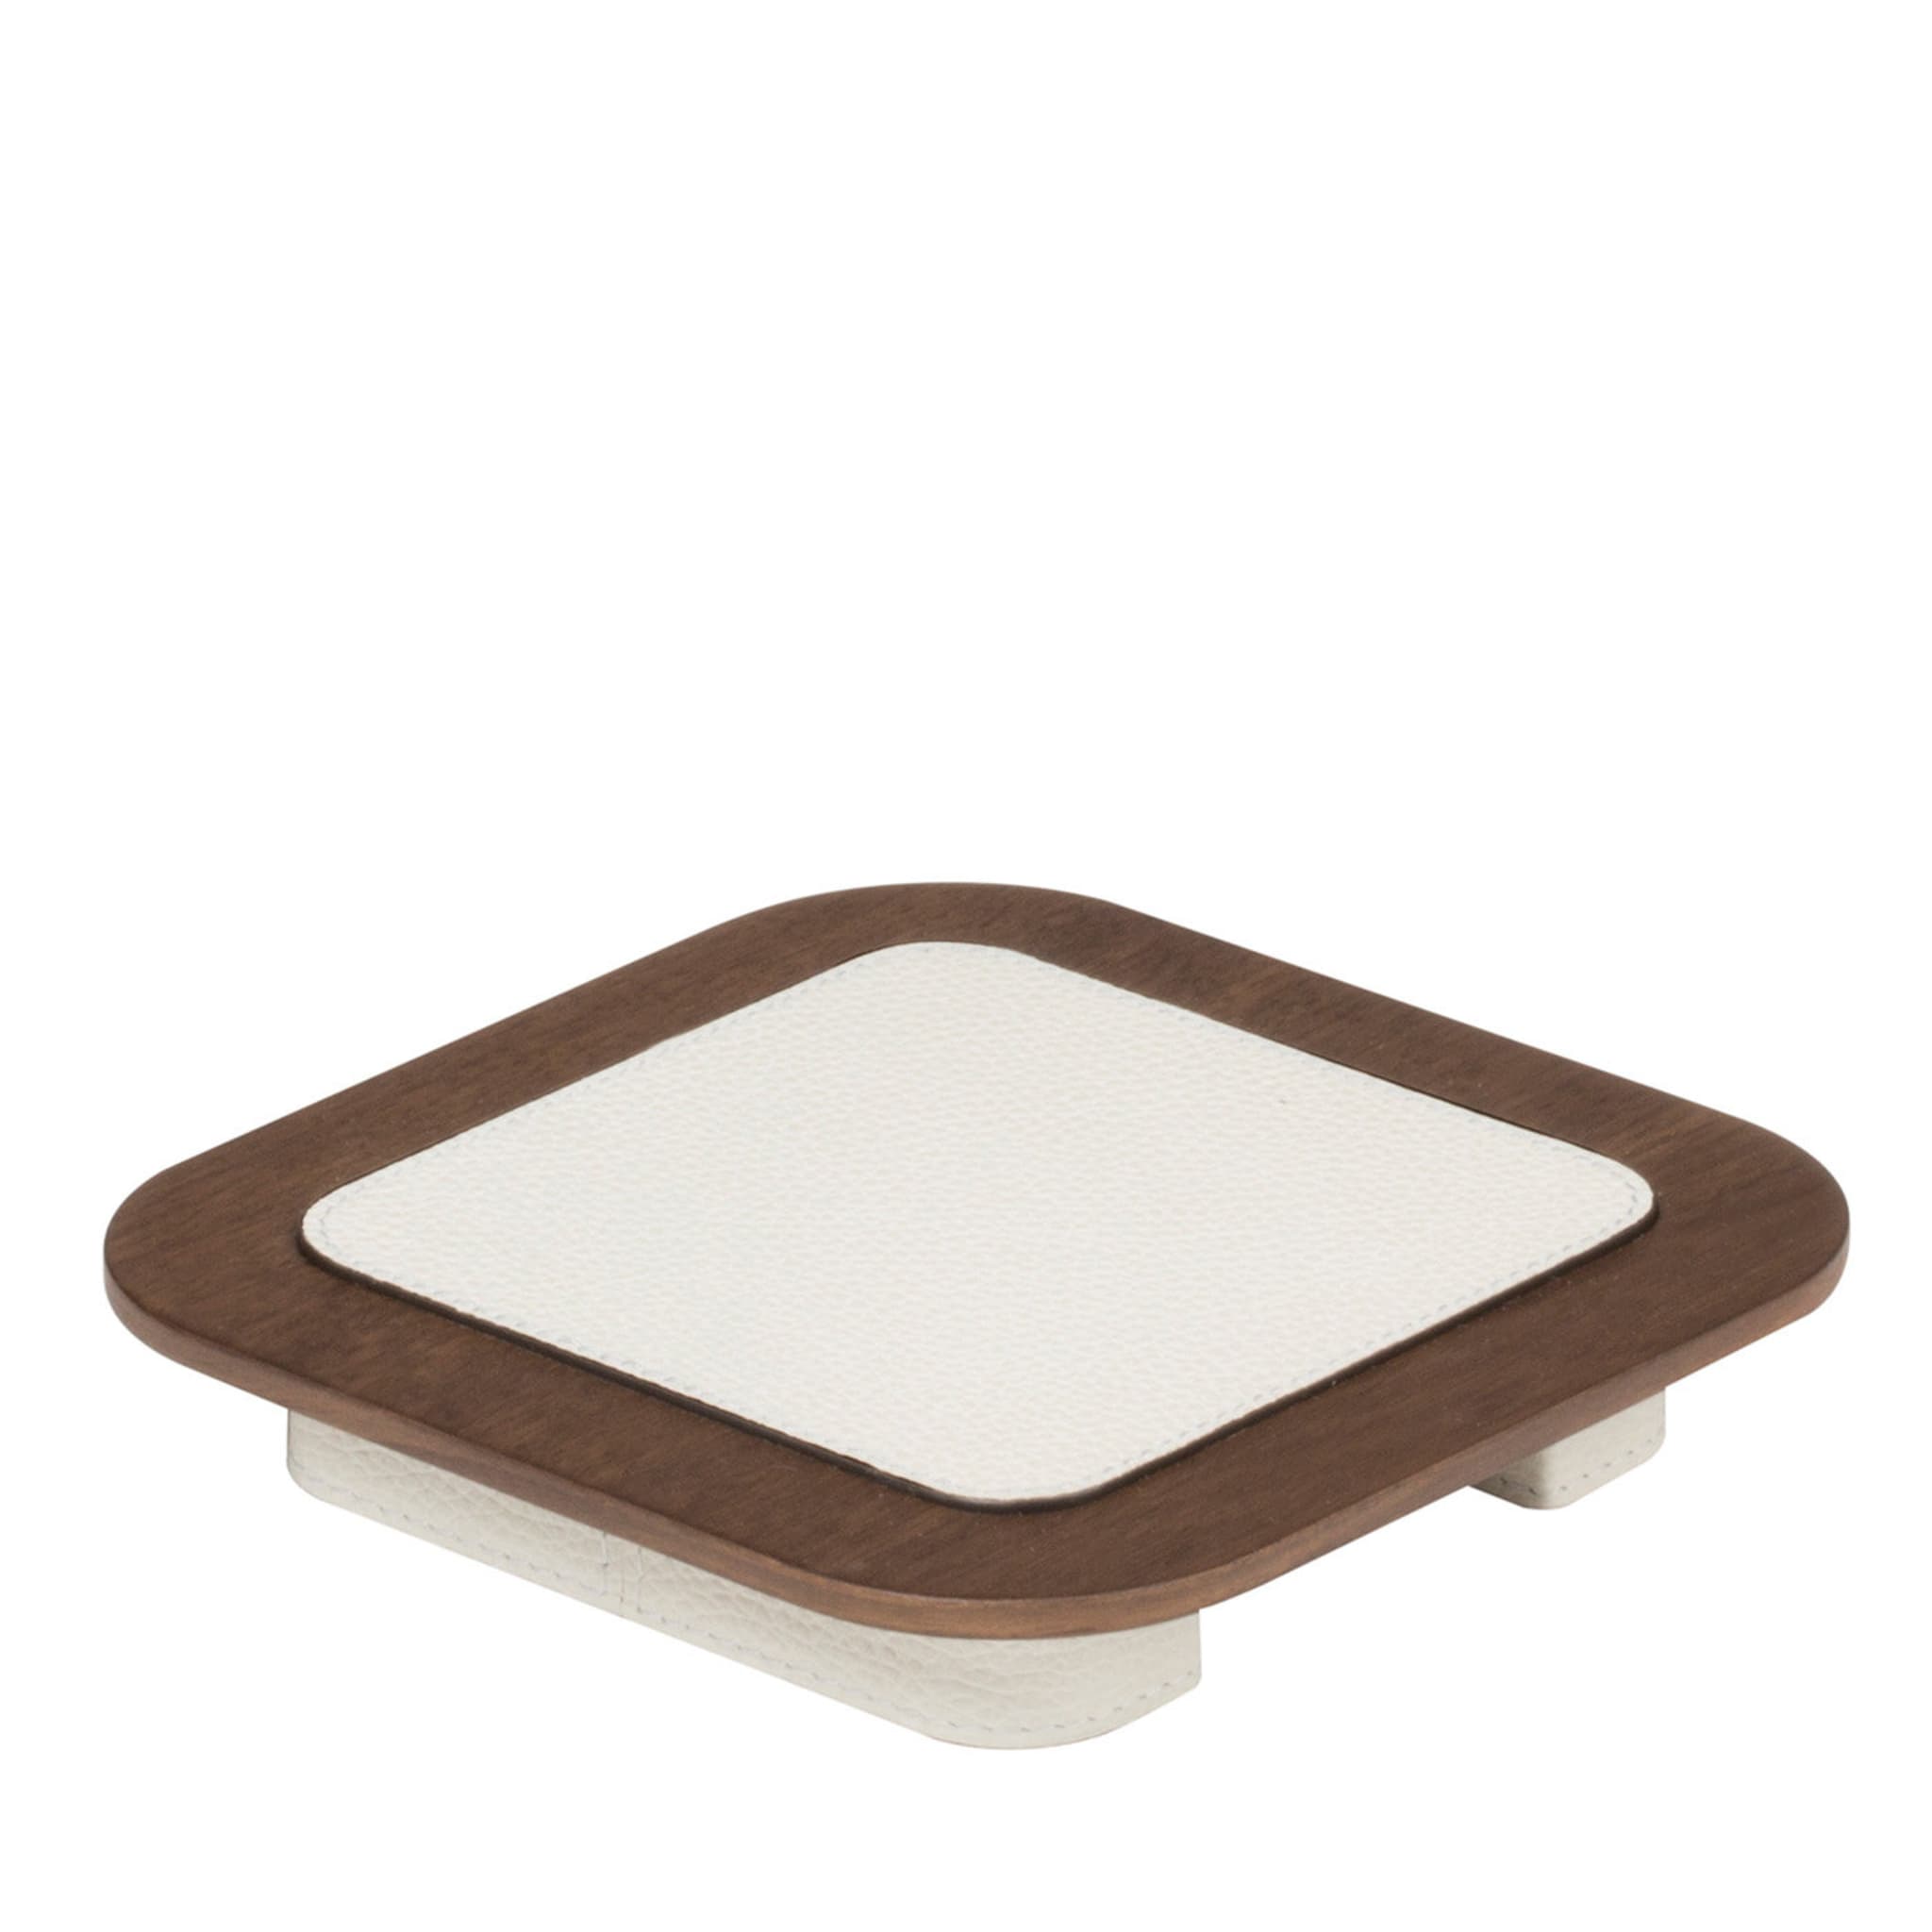 Lloyd Square Tray N. 1 in White and Walnut - Main view